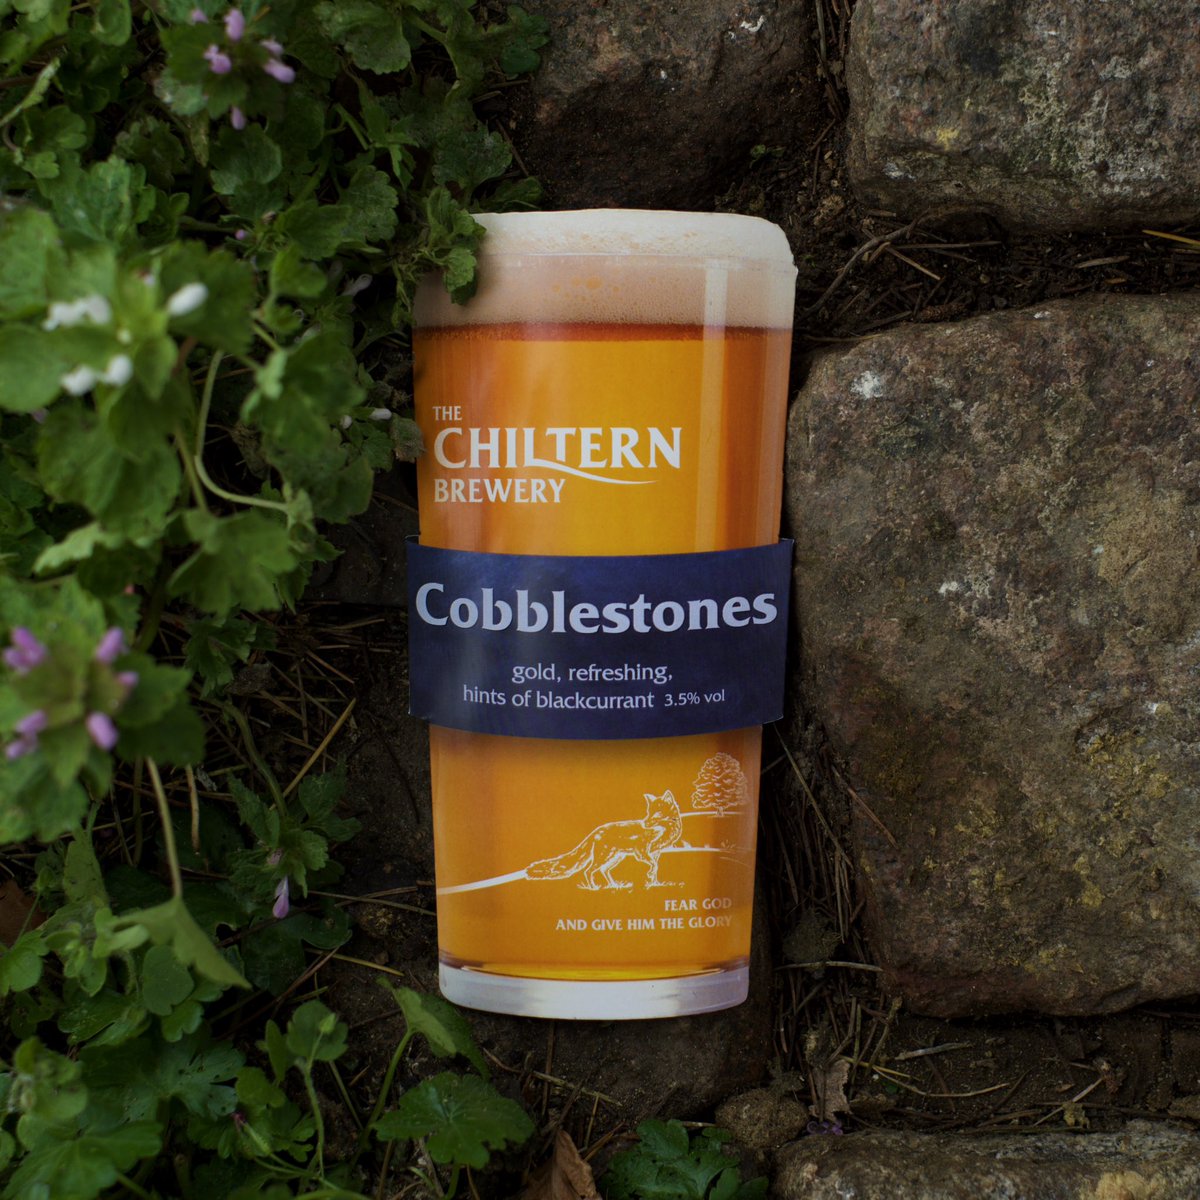 Cobblestones is out now! Our modern early-summer Light English Ale. Gold, 3.4% brewed to celebrate 🏴󠁧󠁢󠁥󠁮󠁧󠁿 Bramling Cross hops. Aroma is of subtle spice, almost lemony character of Bramling Cross. Intriguingly, it evokes blackcurrants in taste. In our shop now (& online for C&C).